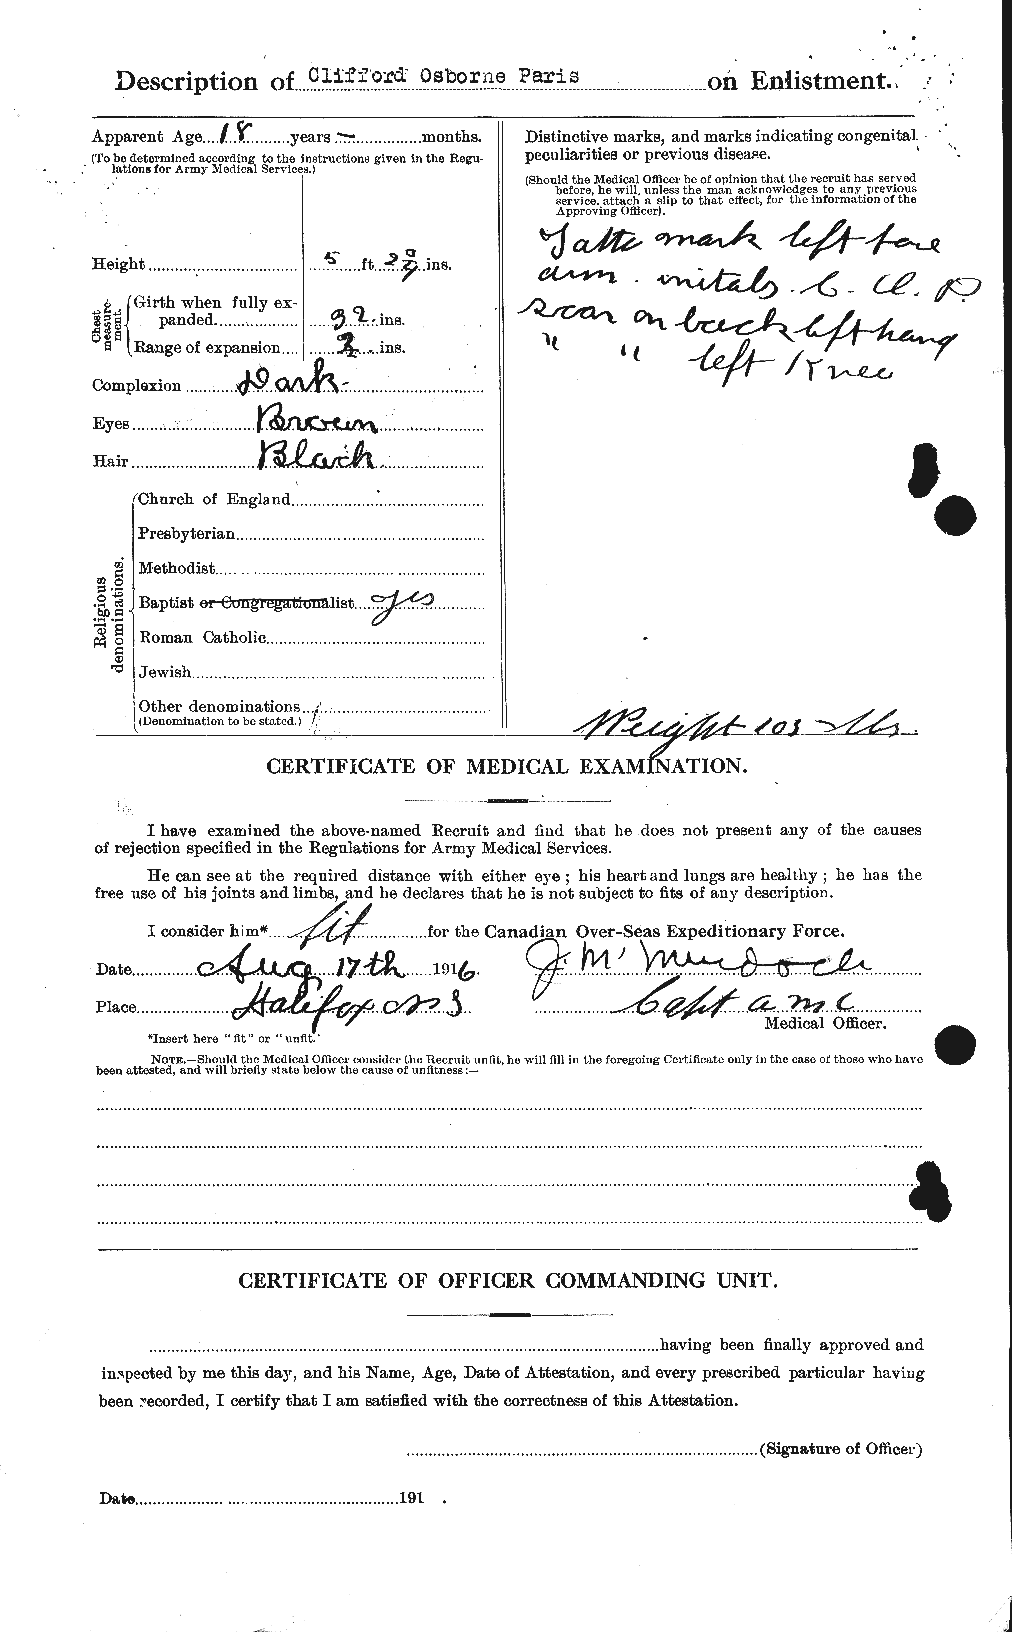 Personnel Records of the First World War - CEF 564613b